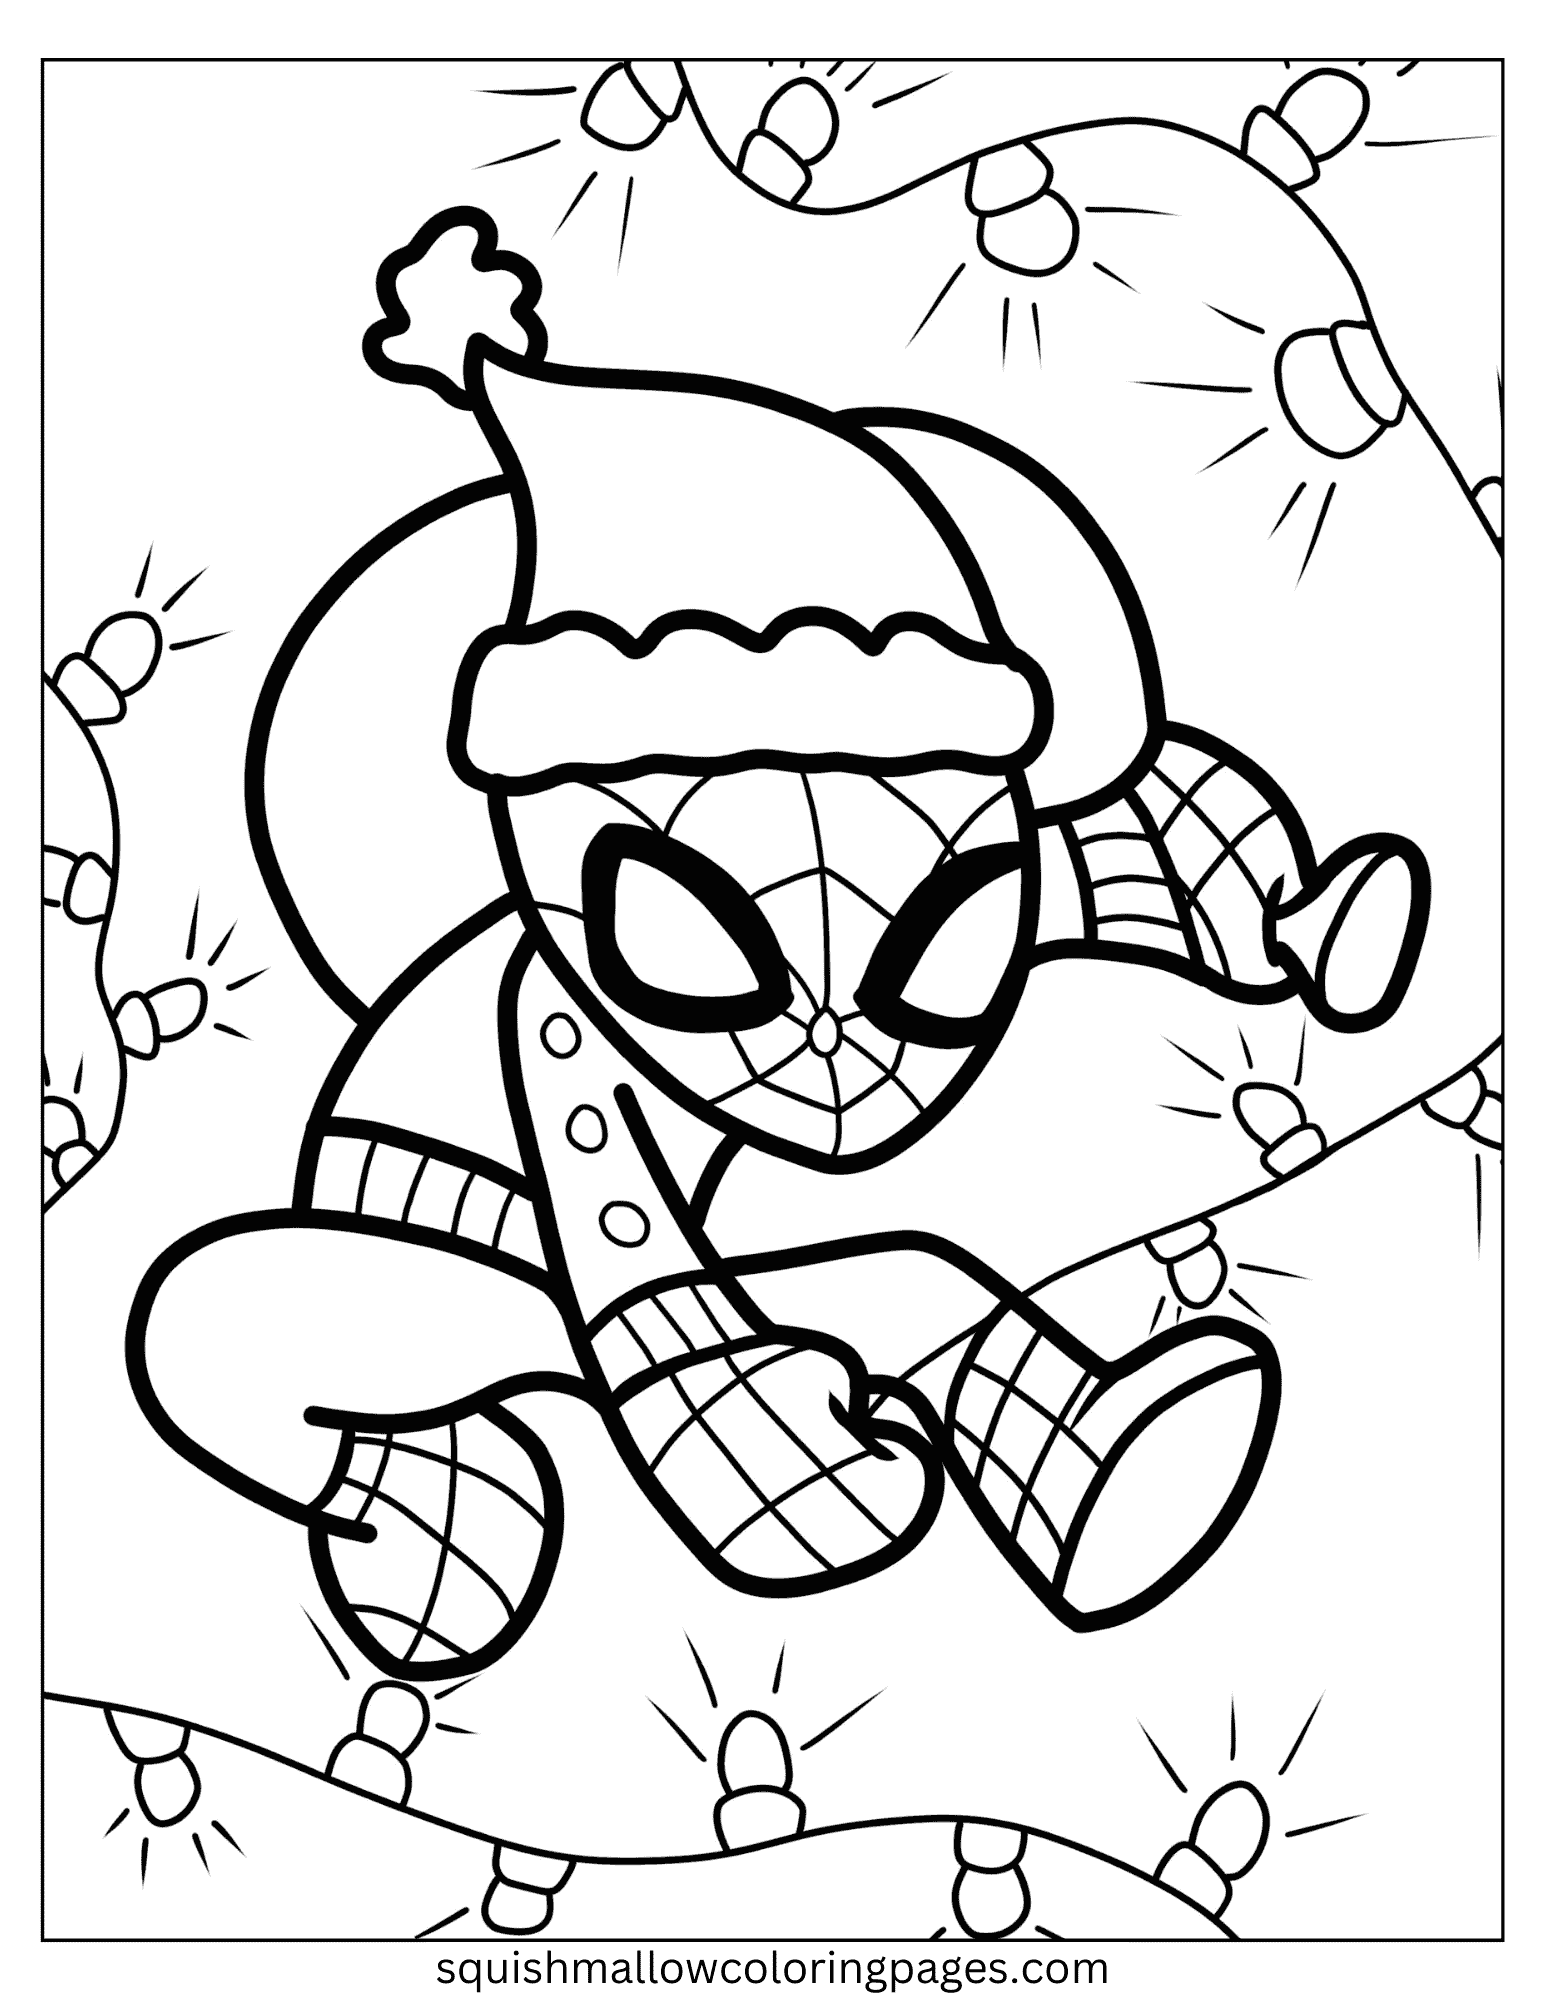 Small Spiderman With Gift Bag